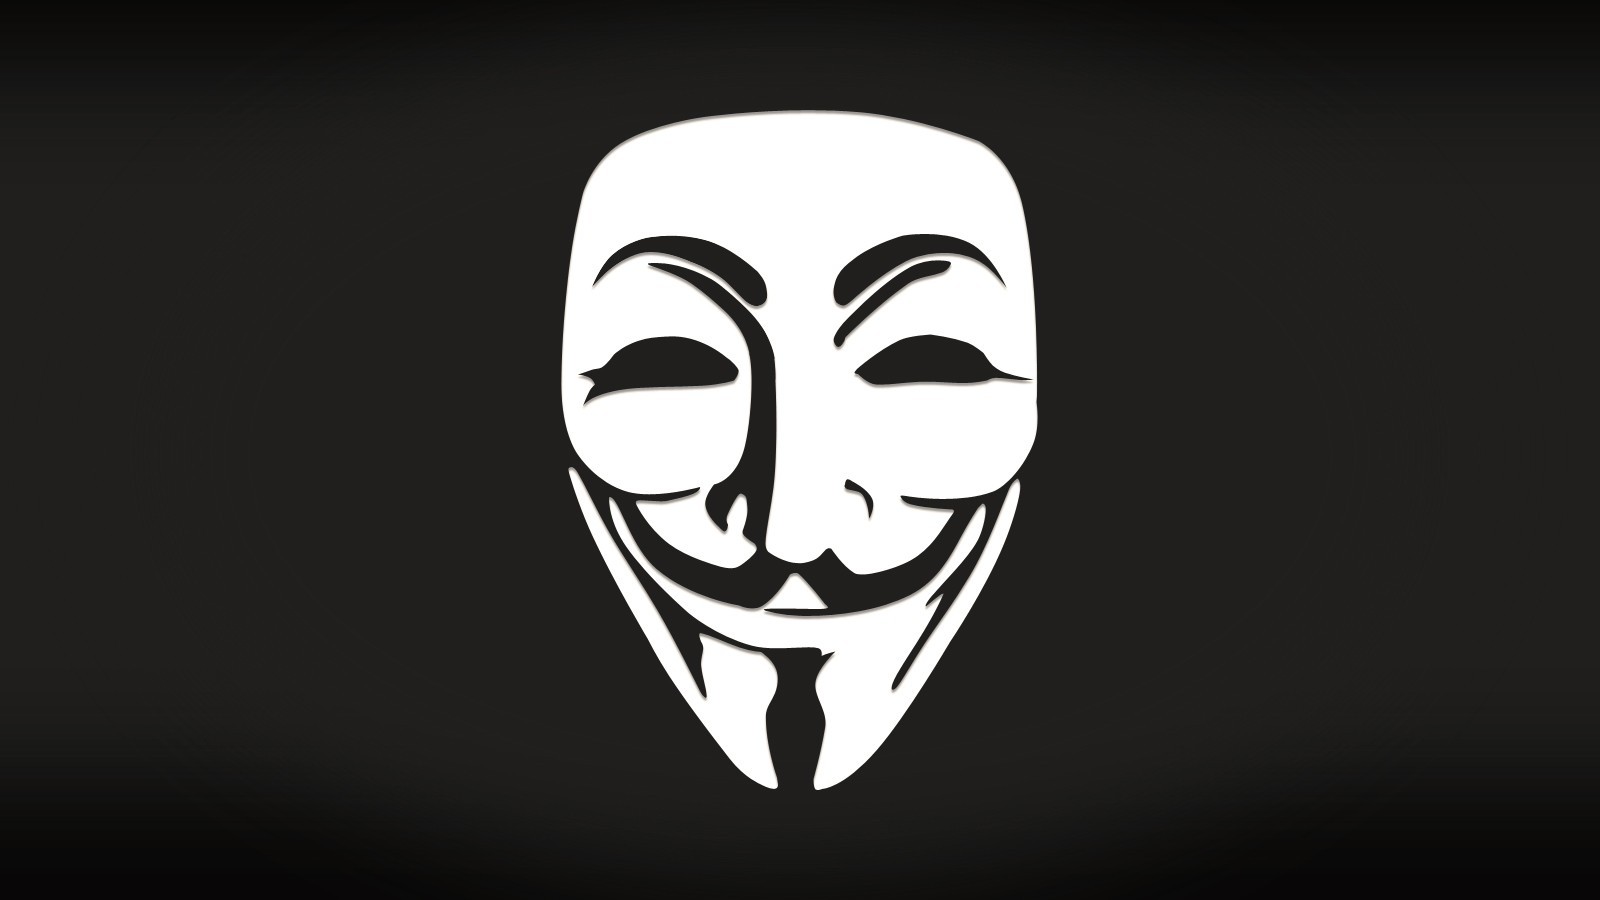 General 1600x900 Guy Fawkes mask mask simple background logo Anonymous (hacker group) monochrome